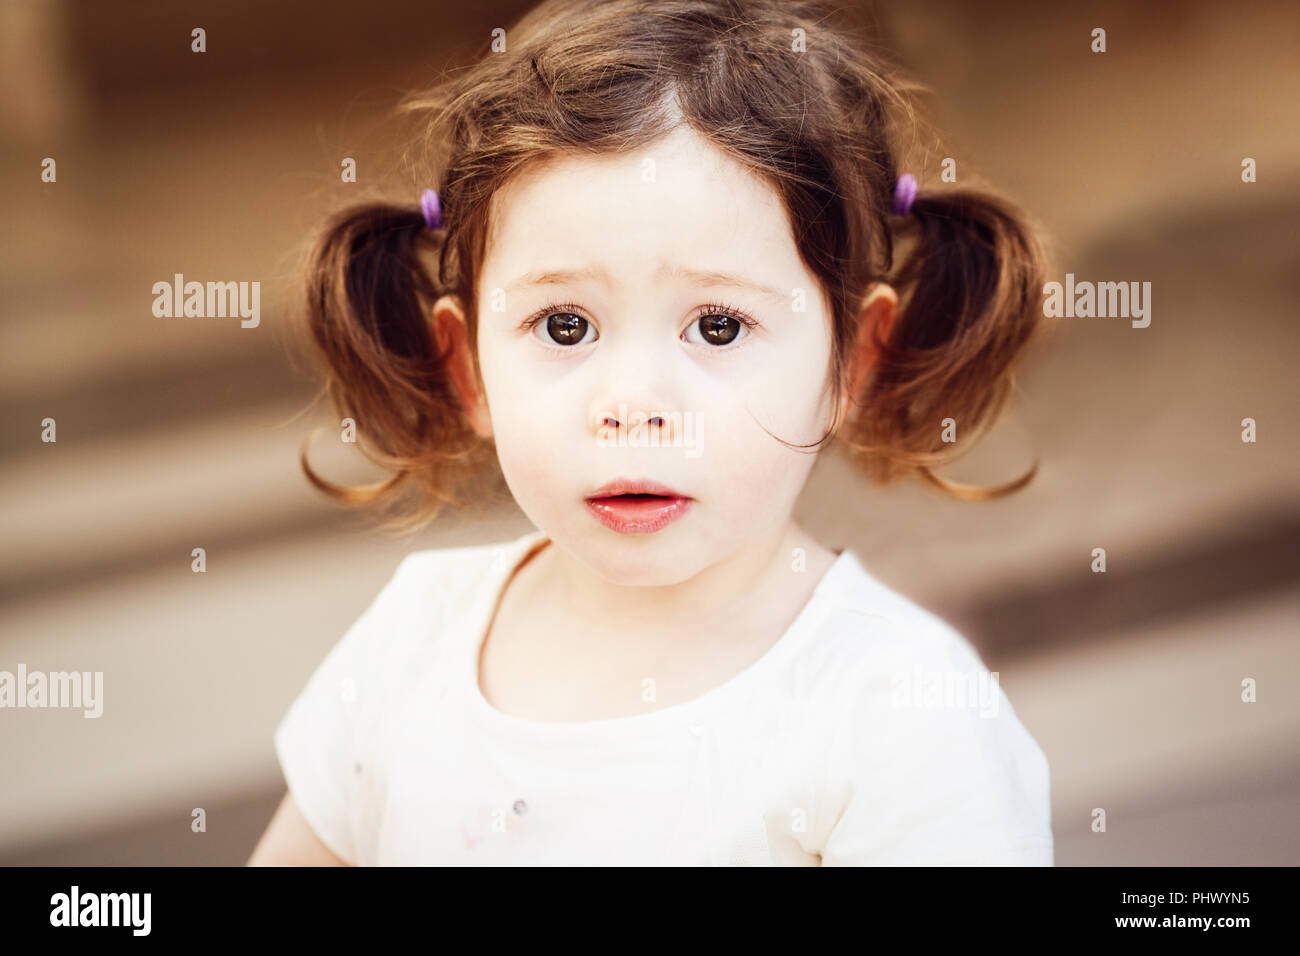 Closeup portrait of cute adorable sad upset white Caucasian toddler girl child with dark brown eyes and curly pig-tails hair in white light dress tshi Stock Photo